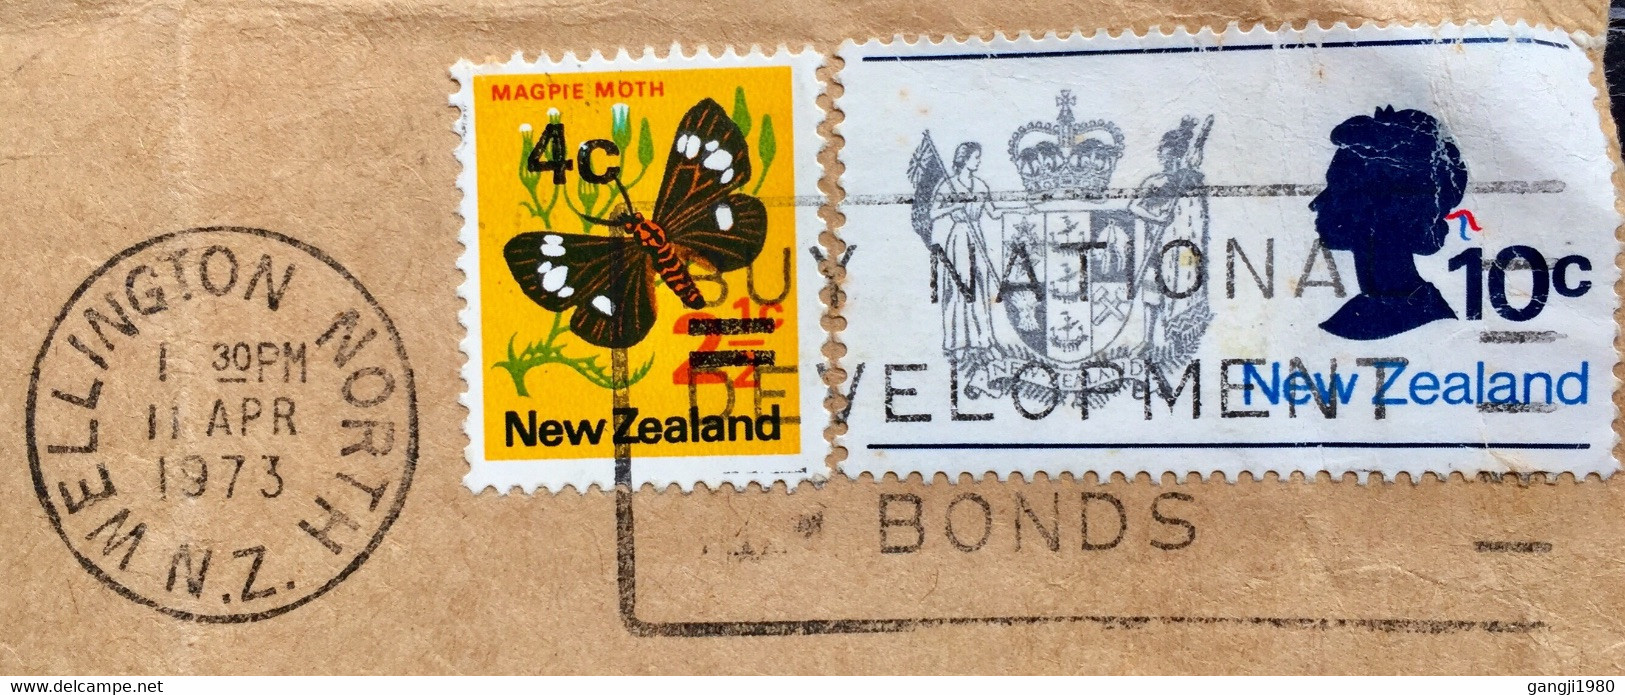 NEW ZEALAND 1973 ,BUY NATIONAL DEVELOPMENT BONDS SLOGAN,EMBASSY OF INDONESIA,USED COVER BUTTERFLY,EAGLE,QUEEN - Cartas & Documentos